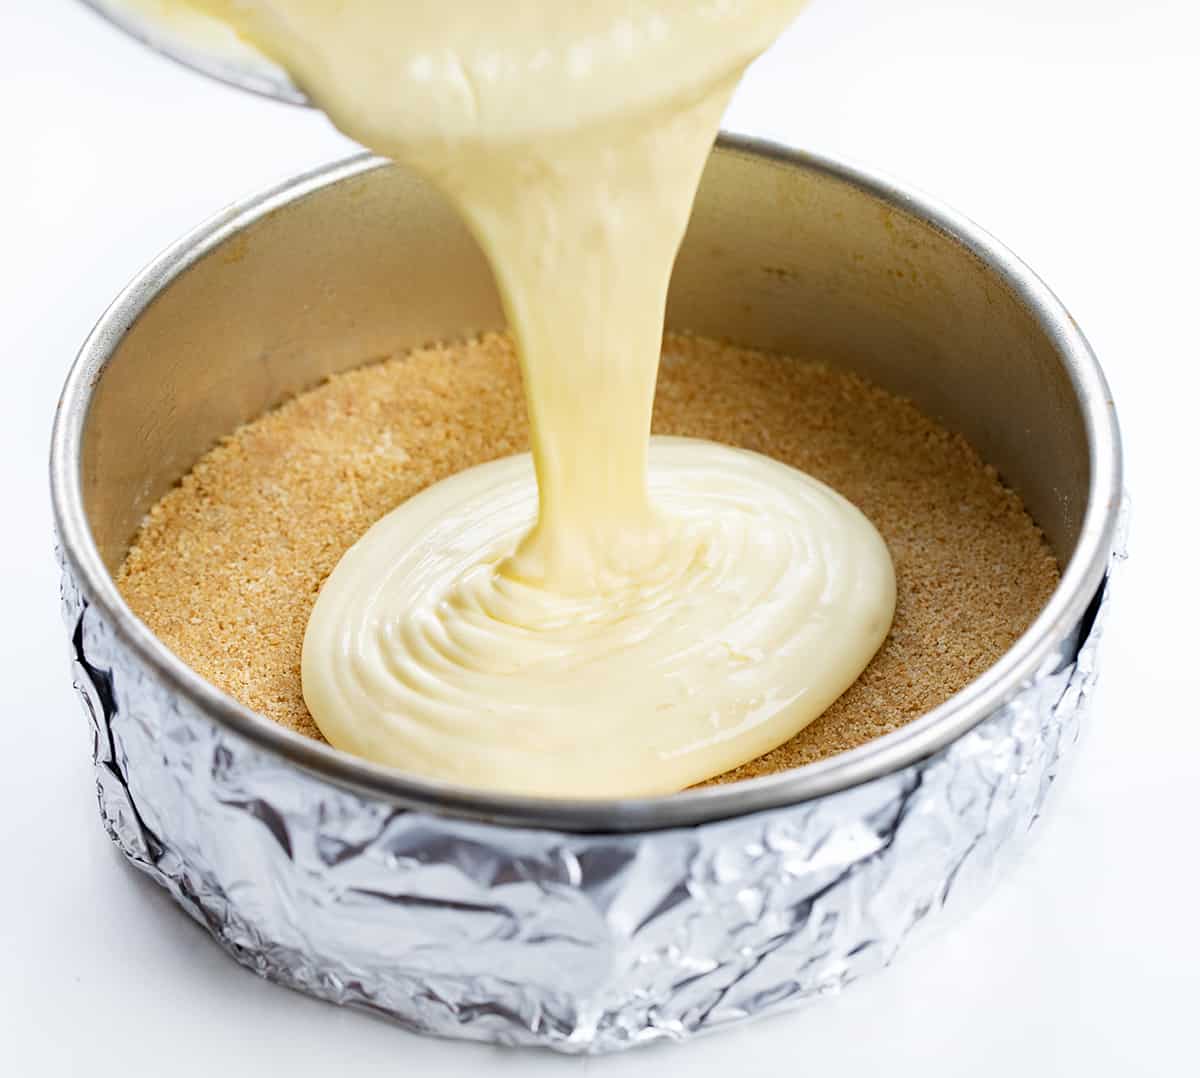 Pouring Lemon Cheesecake Batter into a Pan with Graham Cracker Crust.